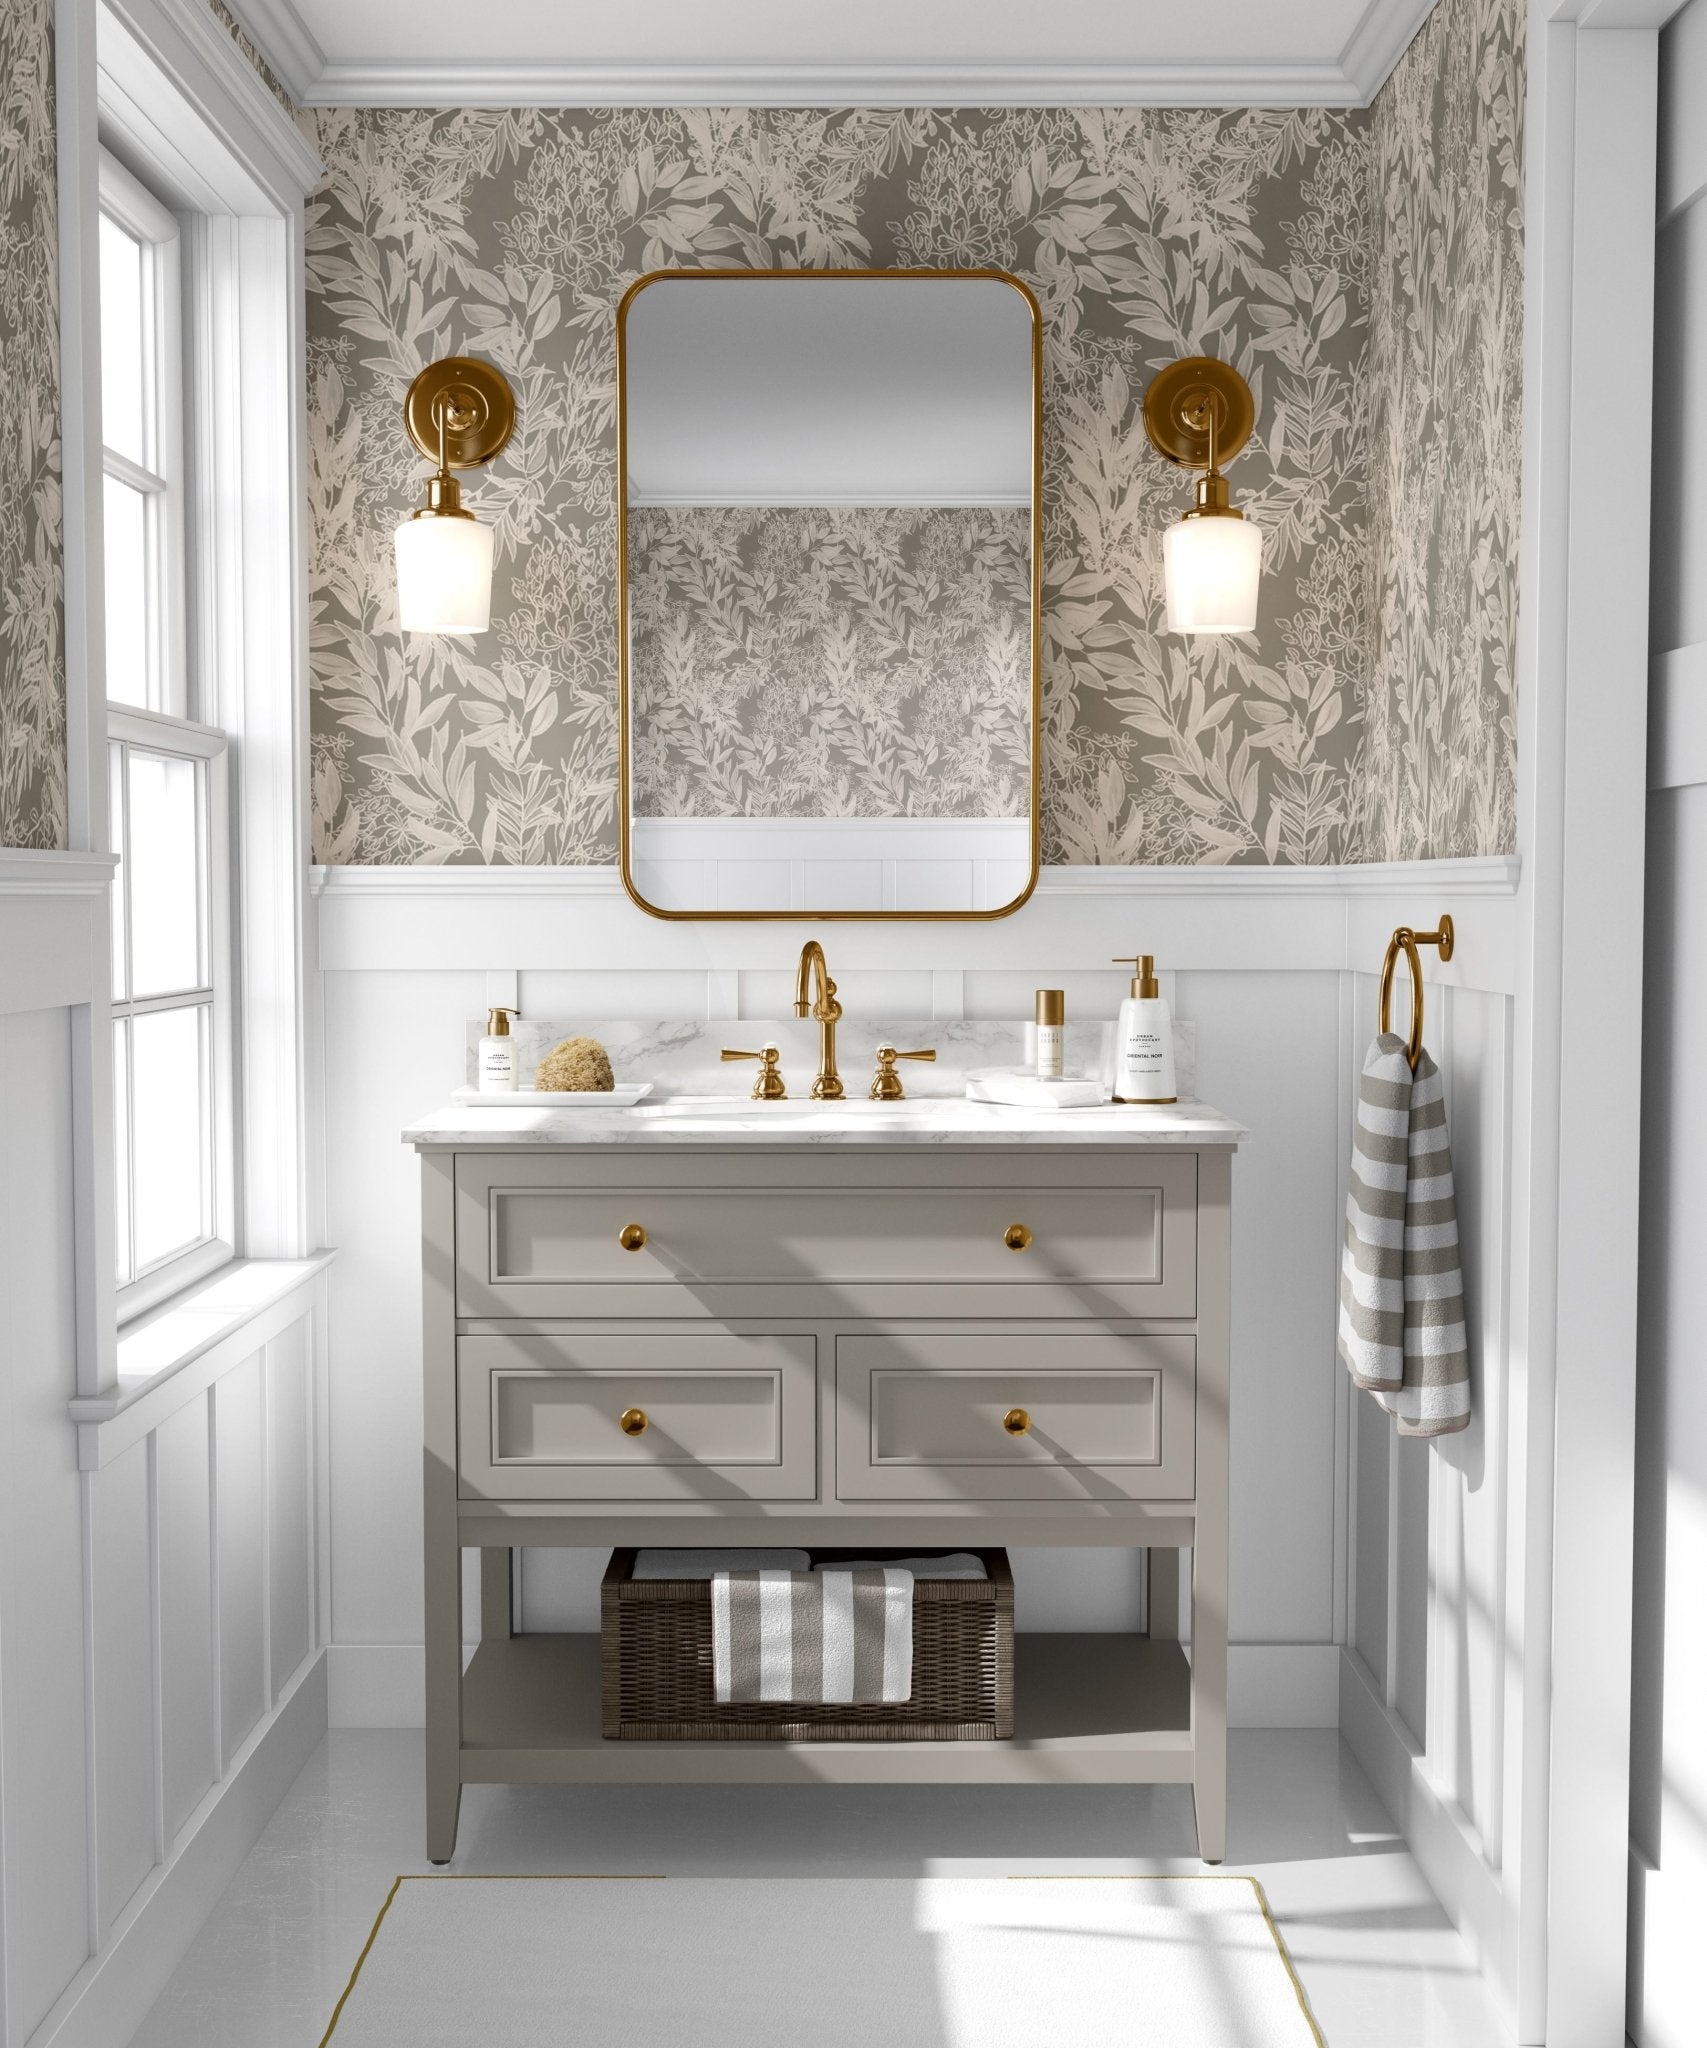  A well-lit bathroom interior with walls covered in a cream leaf pattern wallpaper that matches the previous image, completed with a wooden vanity with gold accents and a rectangular mirror.